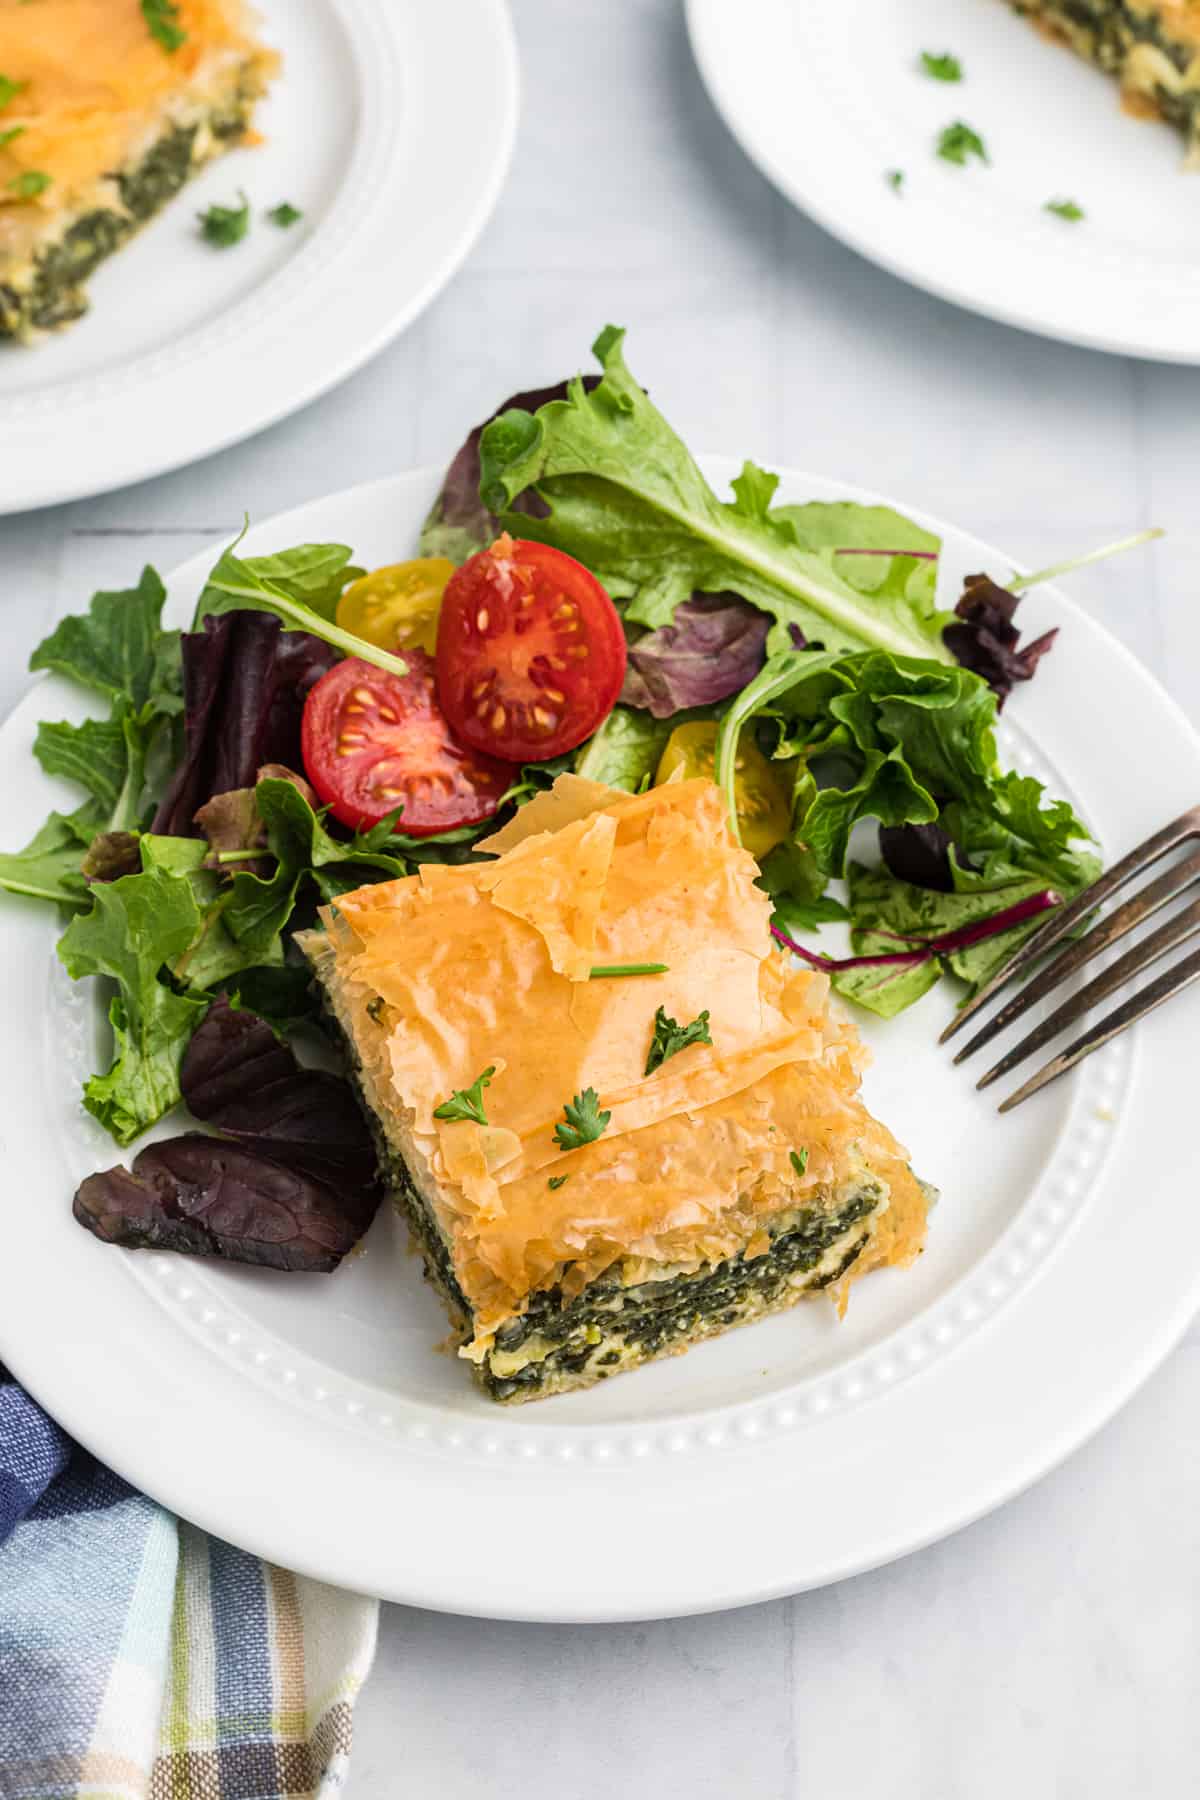 A piece of spanakopita is placed on a white plate next to salad.